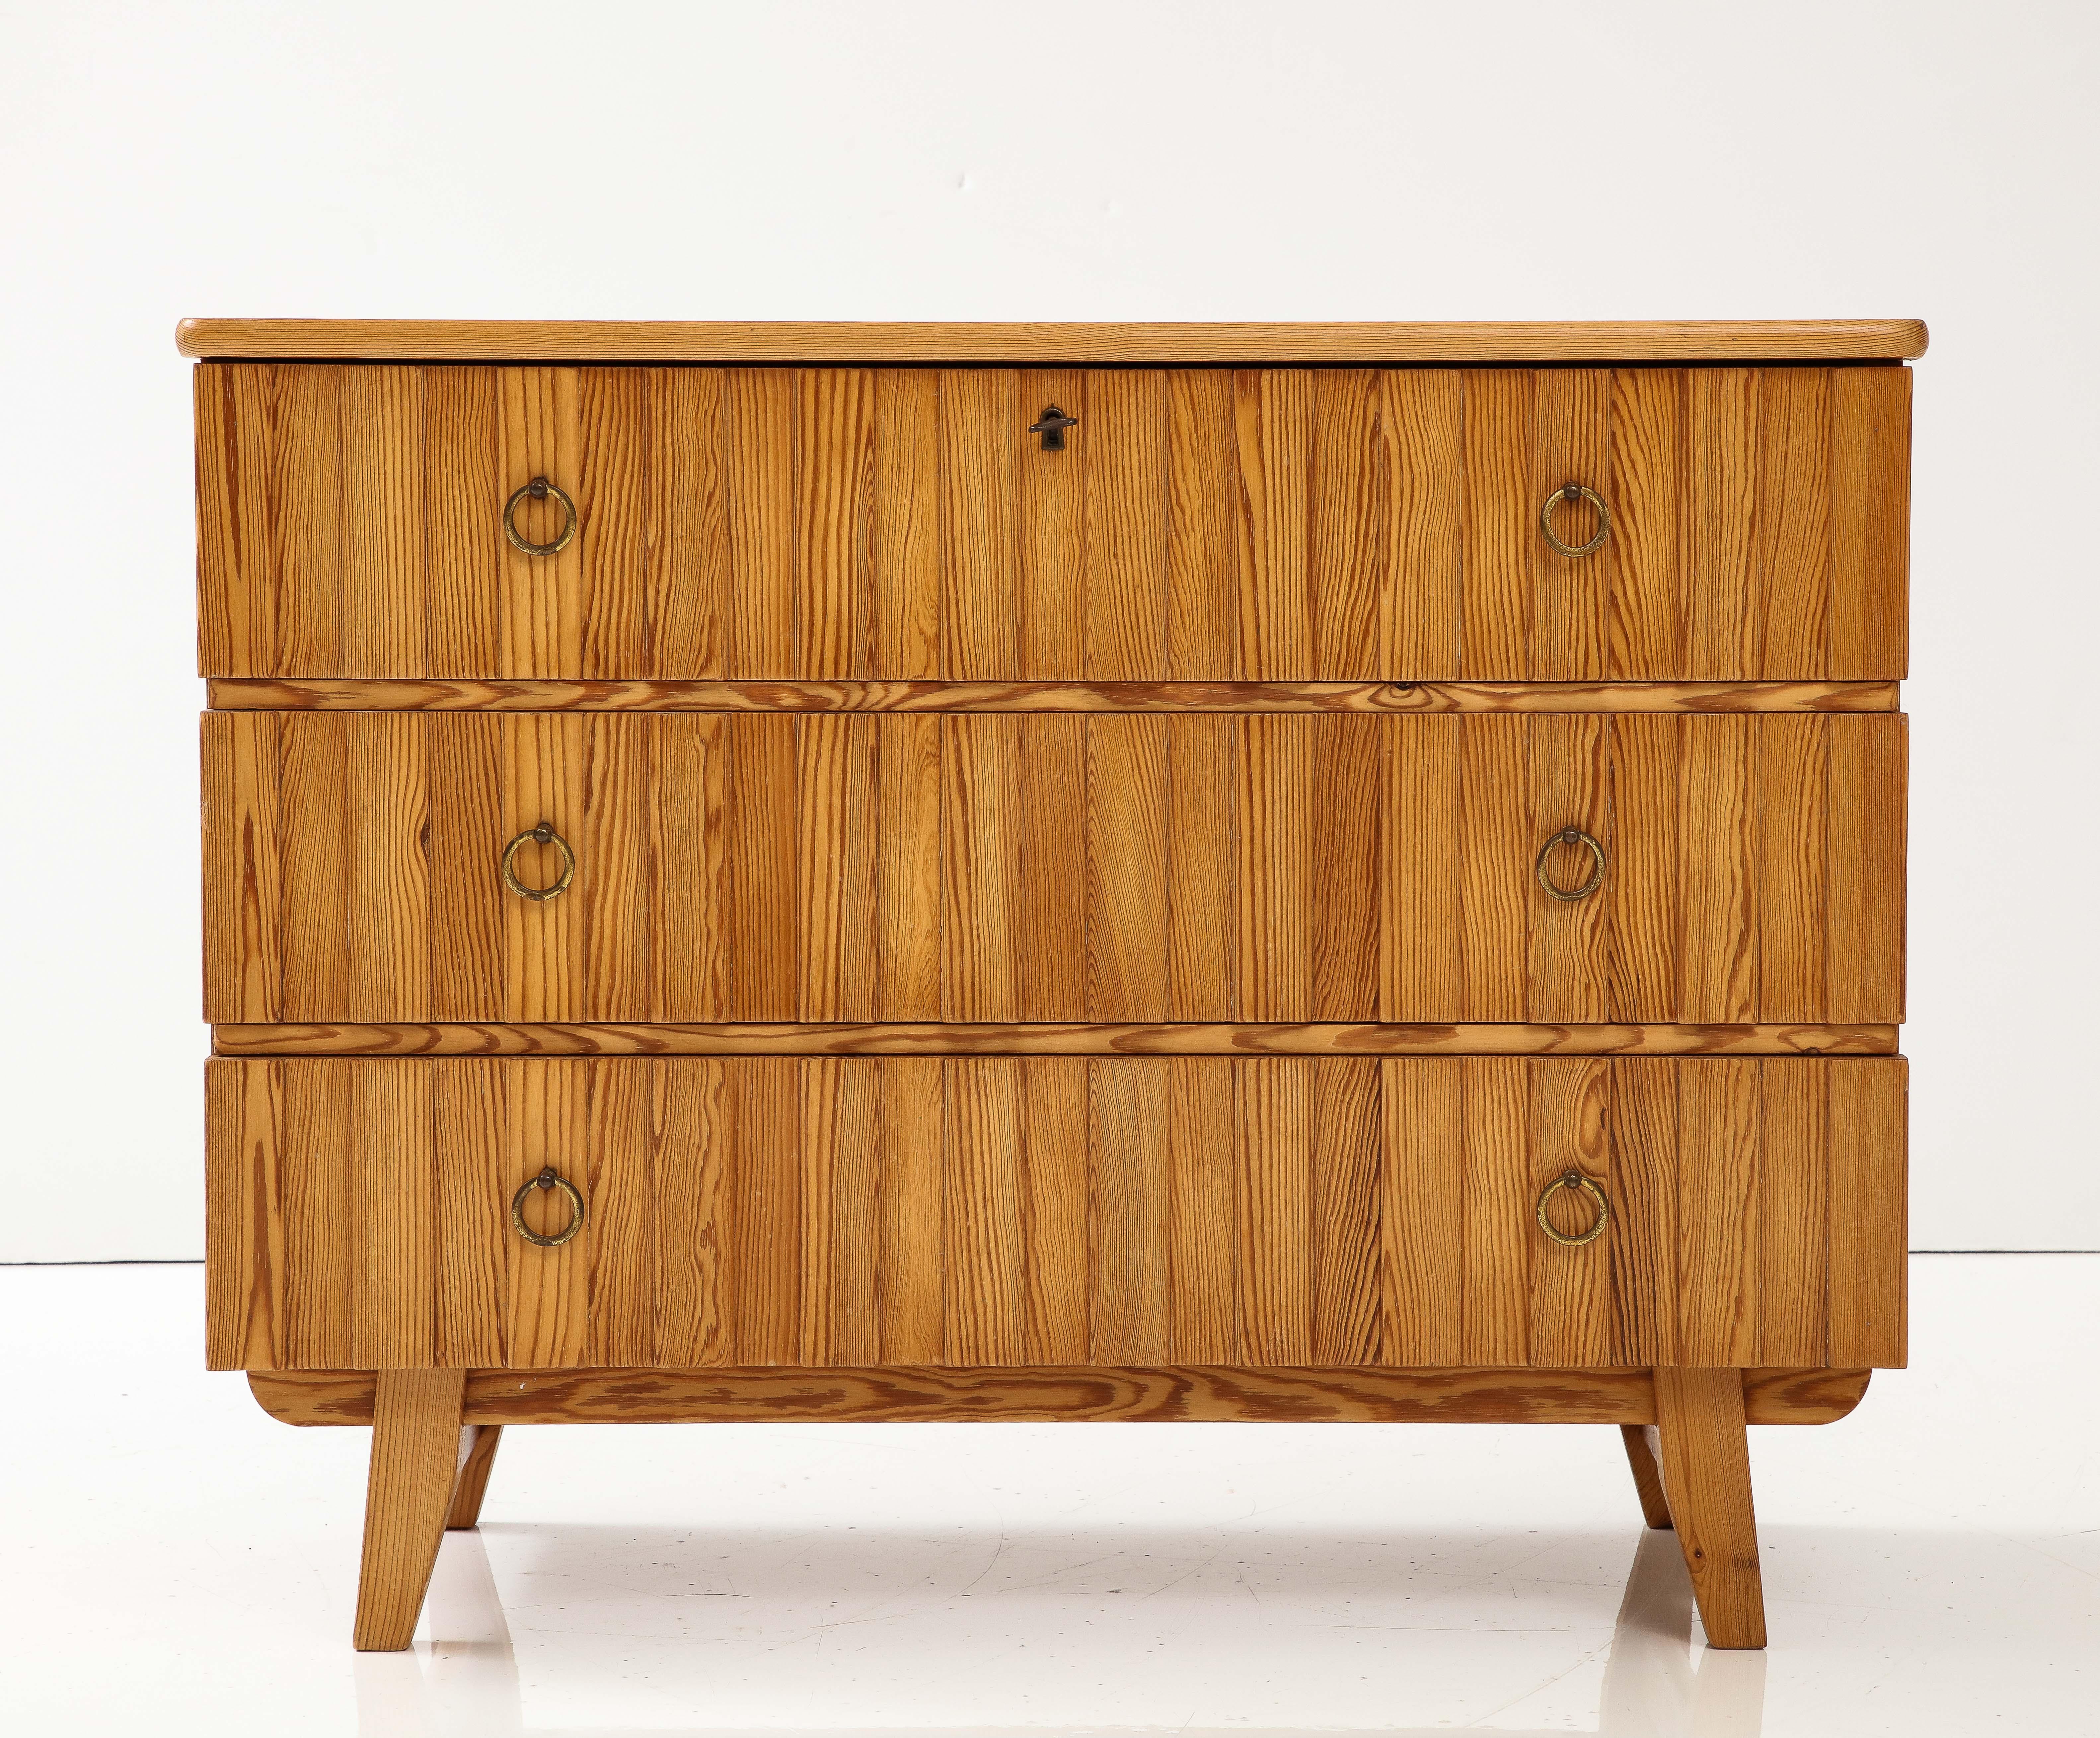 Goran Malmvall Swedish Fir Chest with Ring Handles, Sweden, 1940, signed For Sale 8